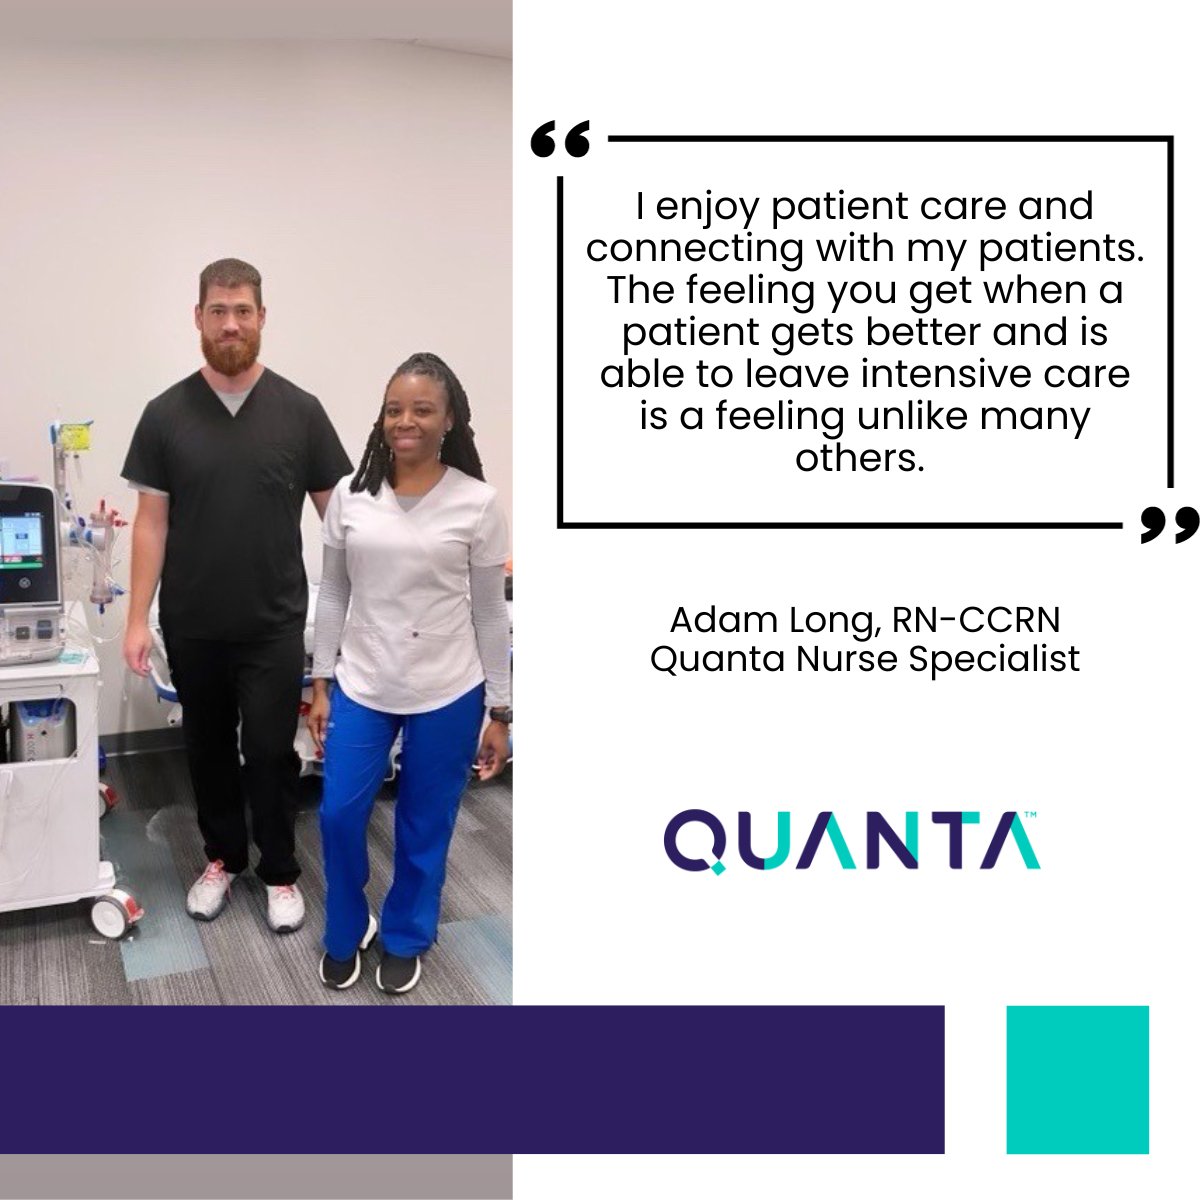 As #NephrologyNursesWeek 👏🎈comes to a close, we couldn't miss the chance to spotlight another remarkable member of the Quanta team, Adam Long! Adam was inspired to become a nurse by his grandfather, who worked as a nurse for many decades. #nephrologynursing #thankyou